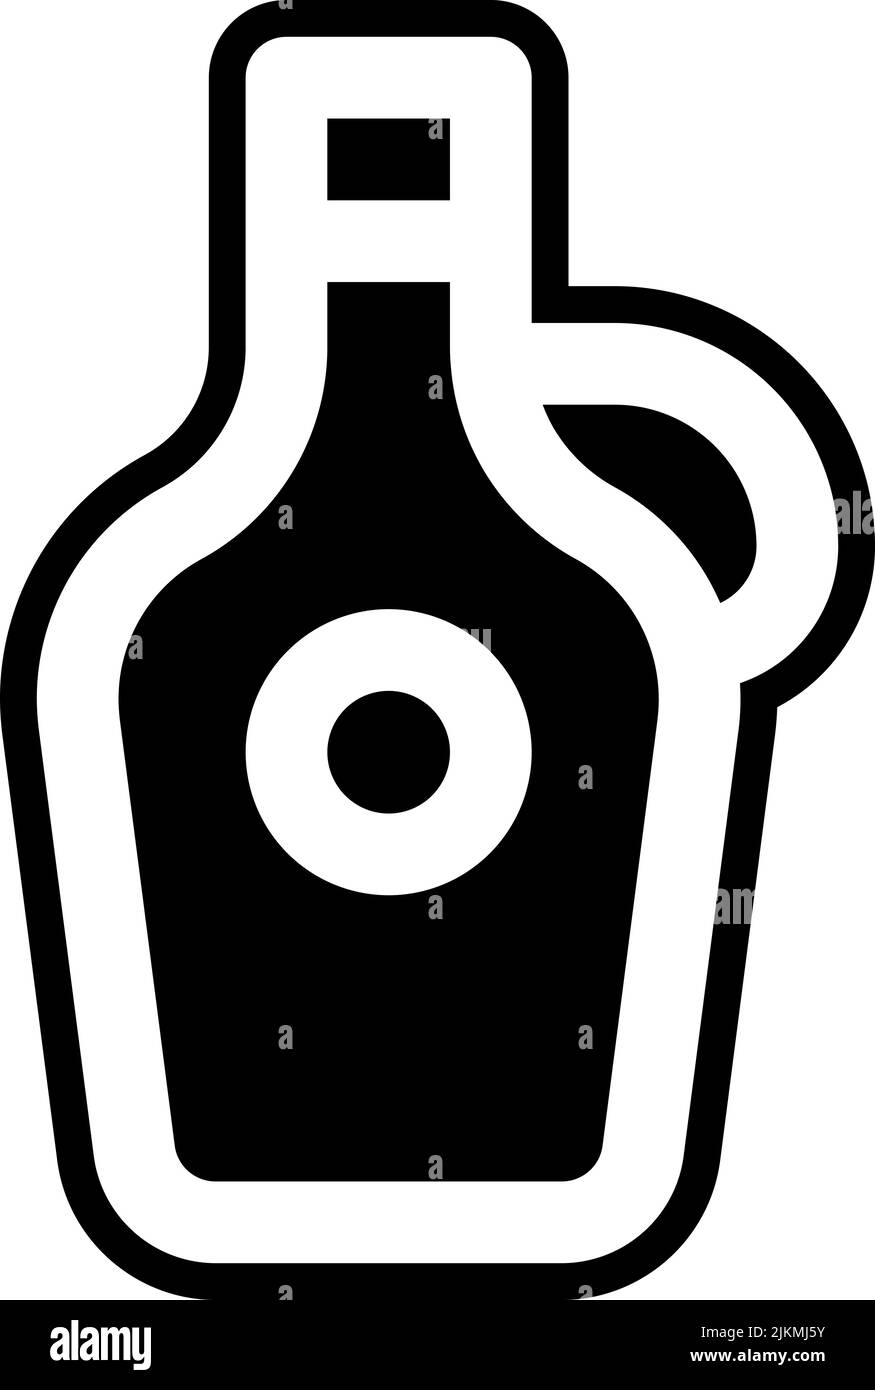 maple syrup icon black vector illustration. Stock Vector